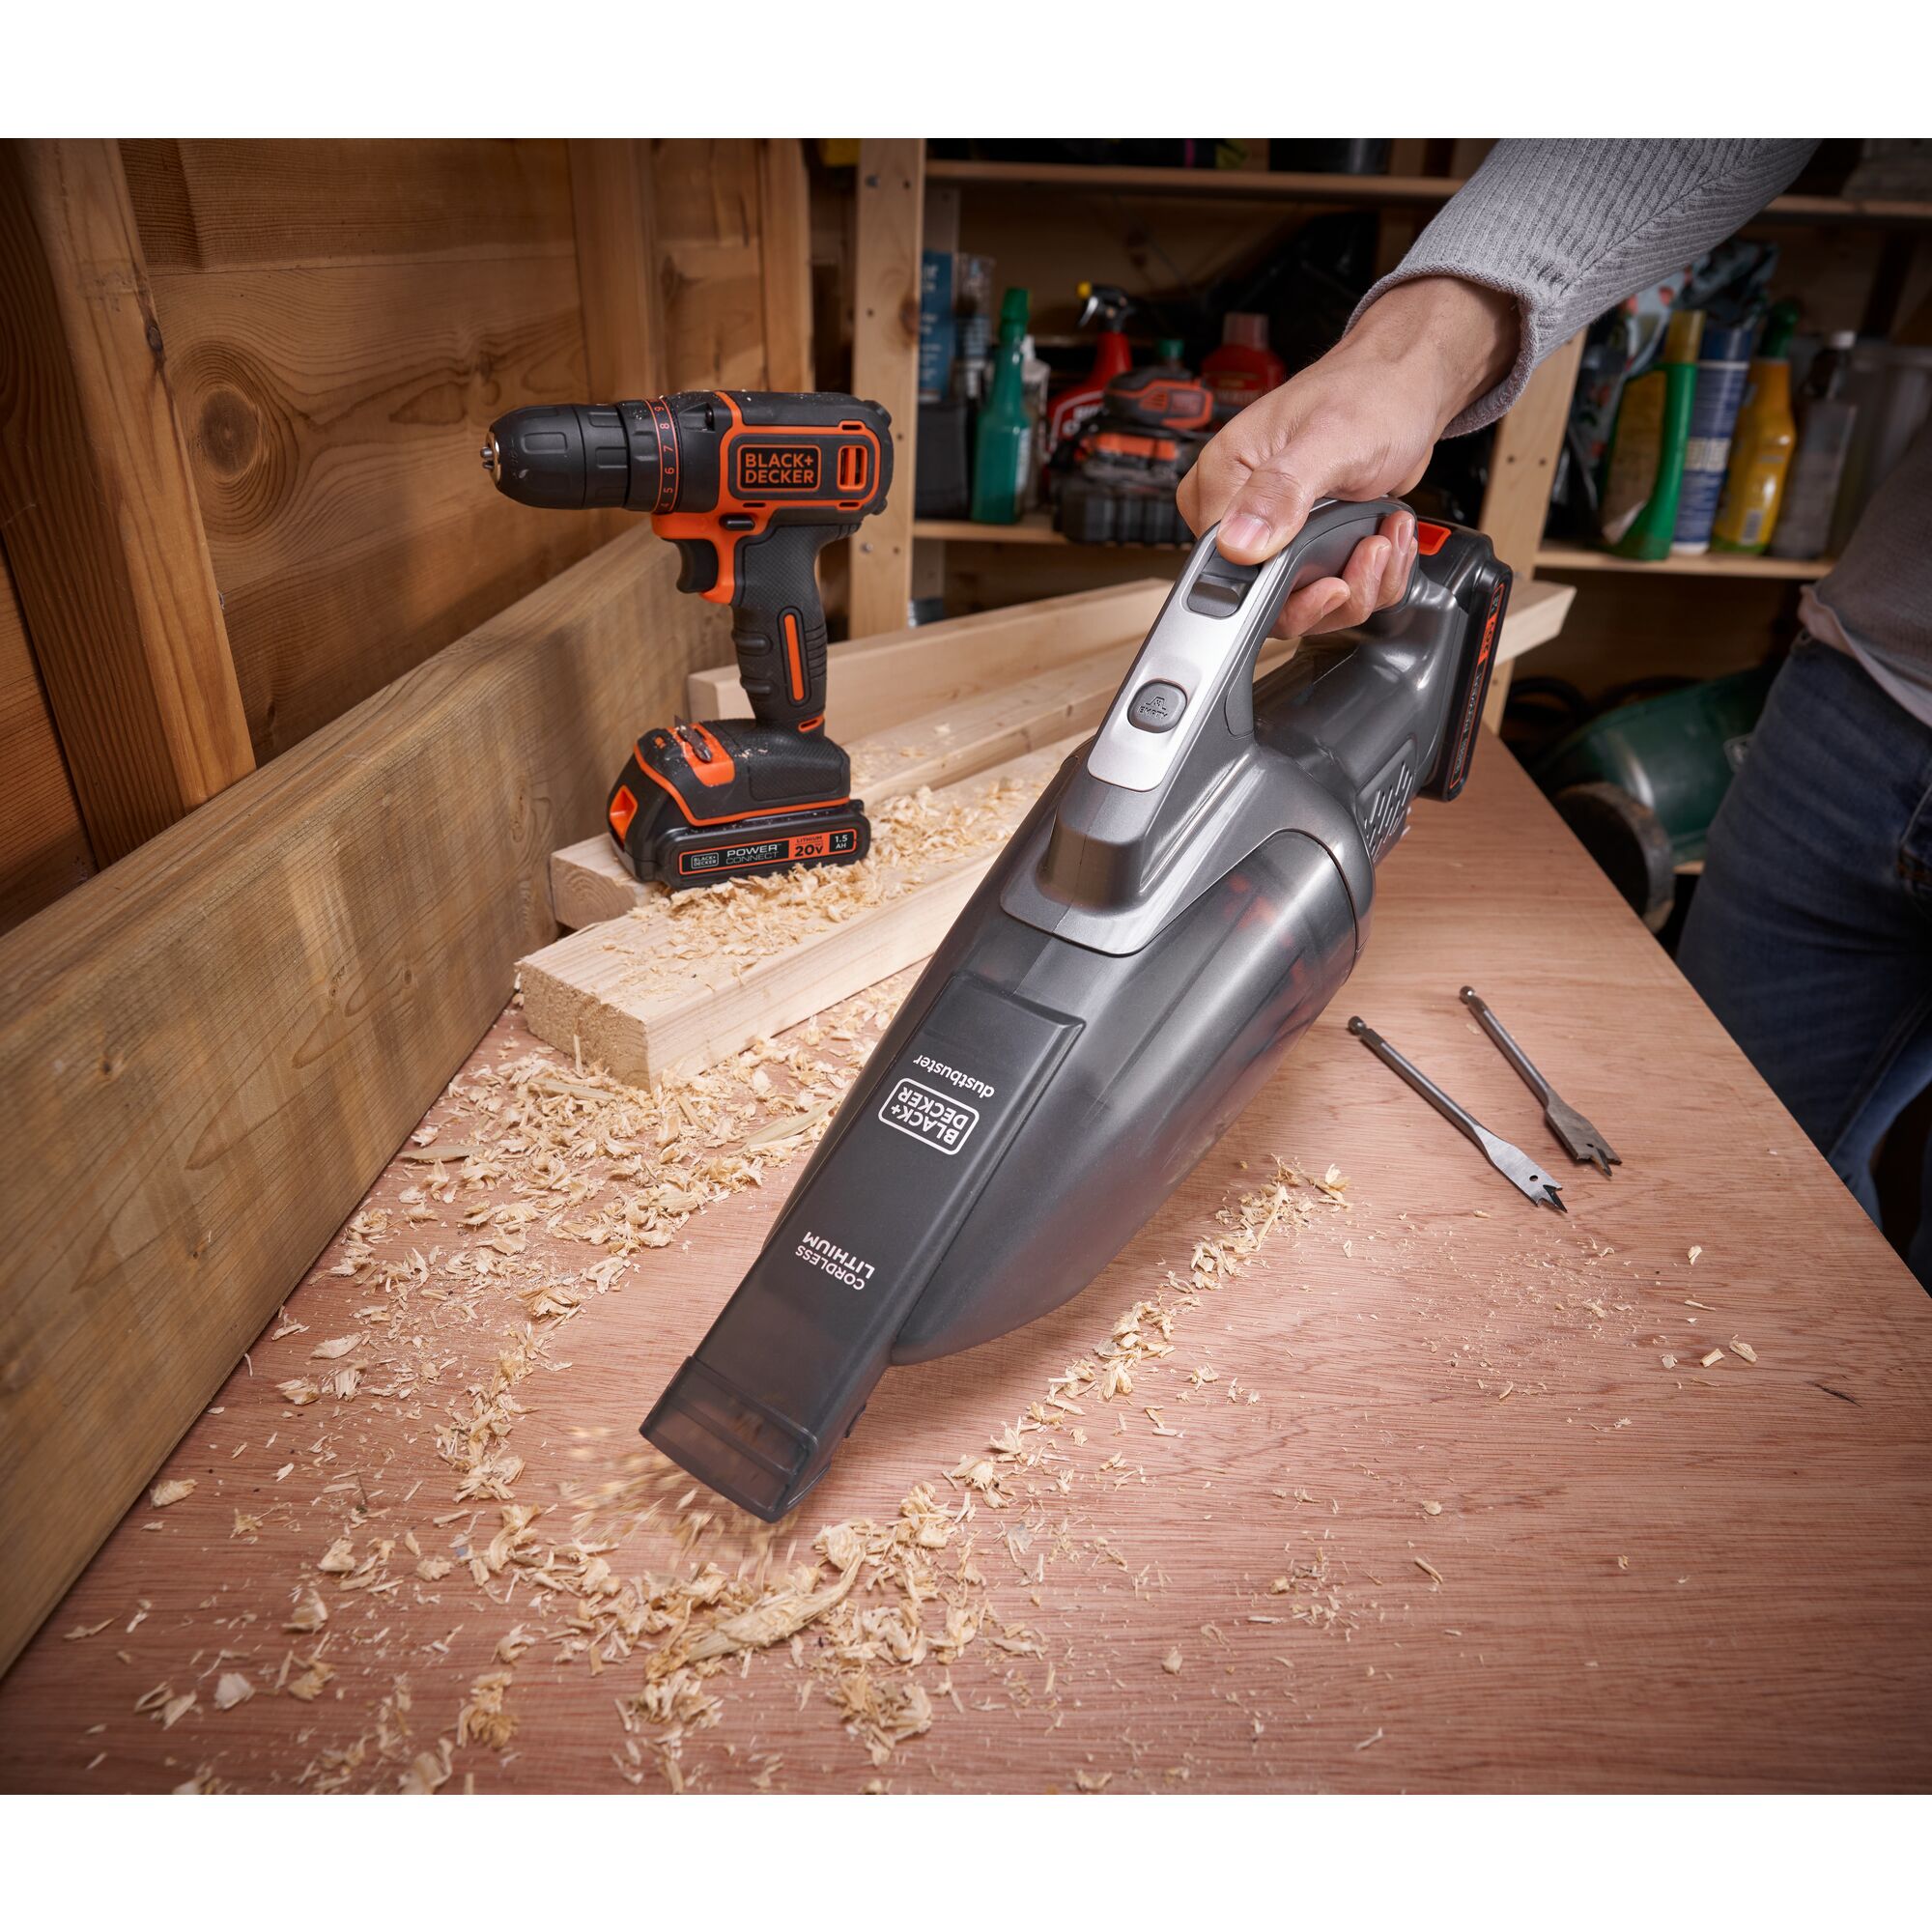 20 volt Powerconnect hand vacuum being used to clean wood chips off of a worktable